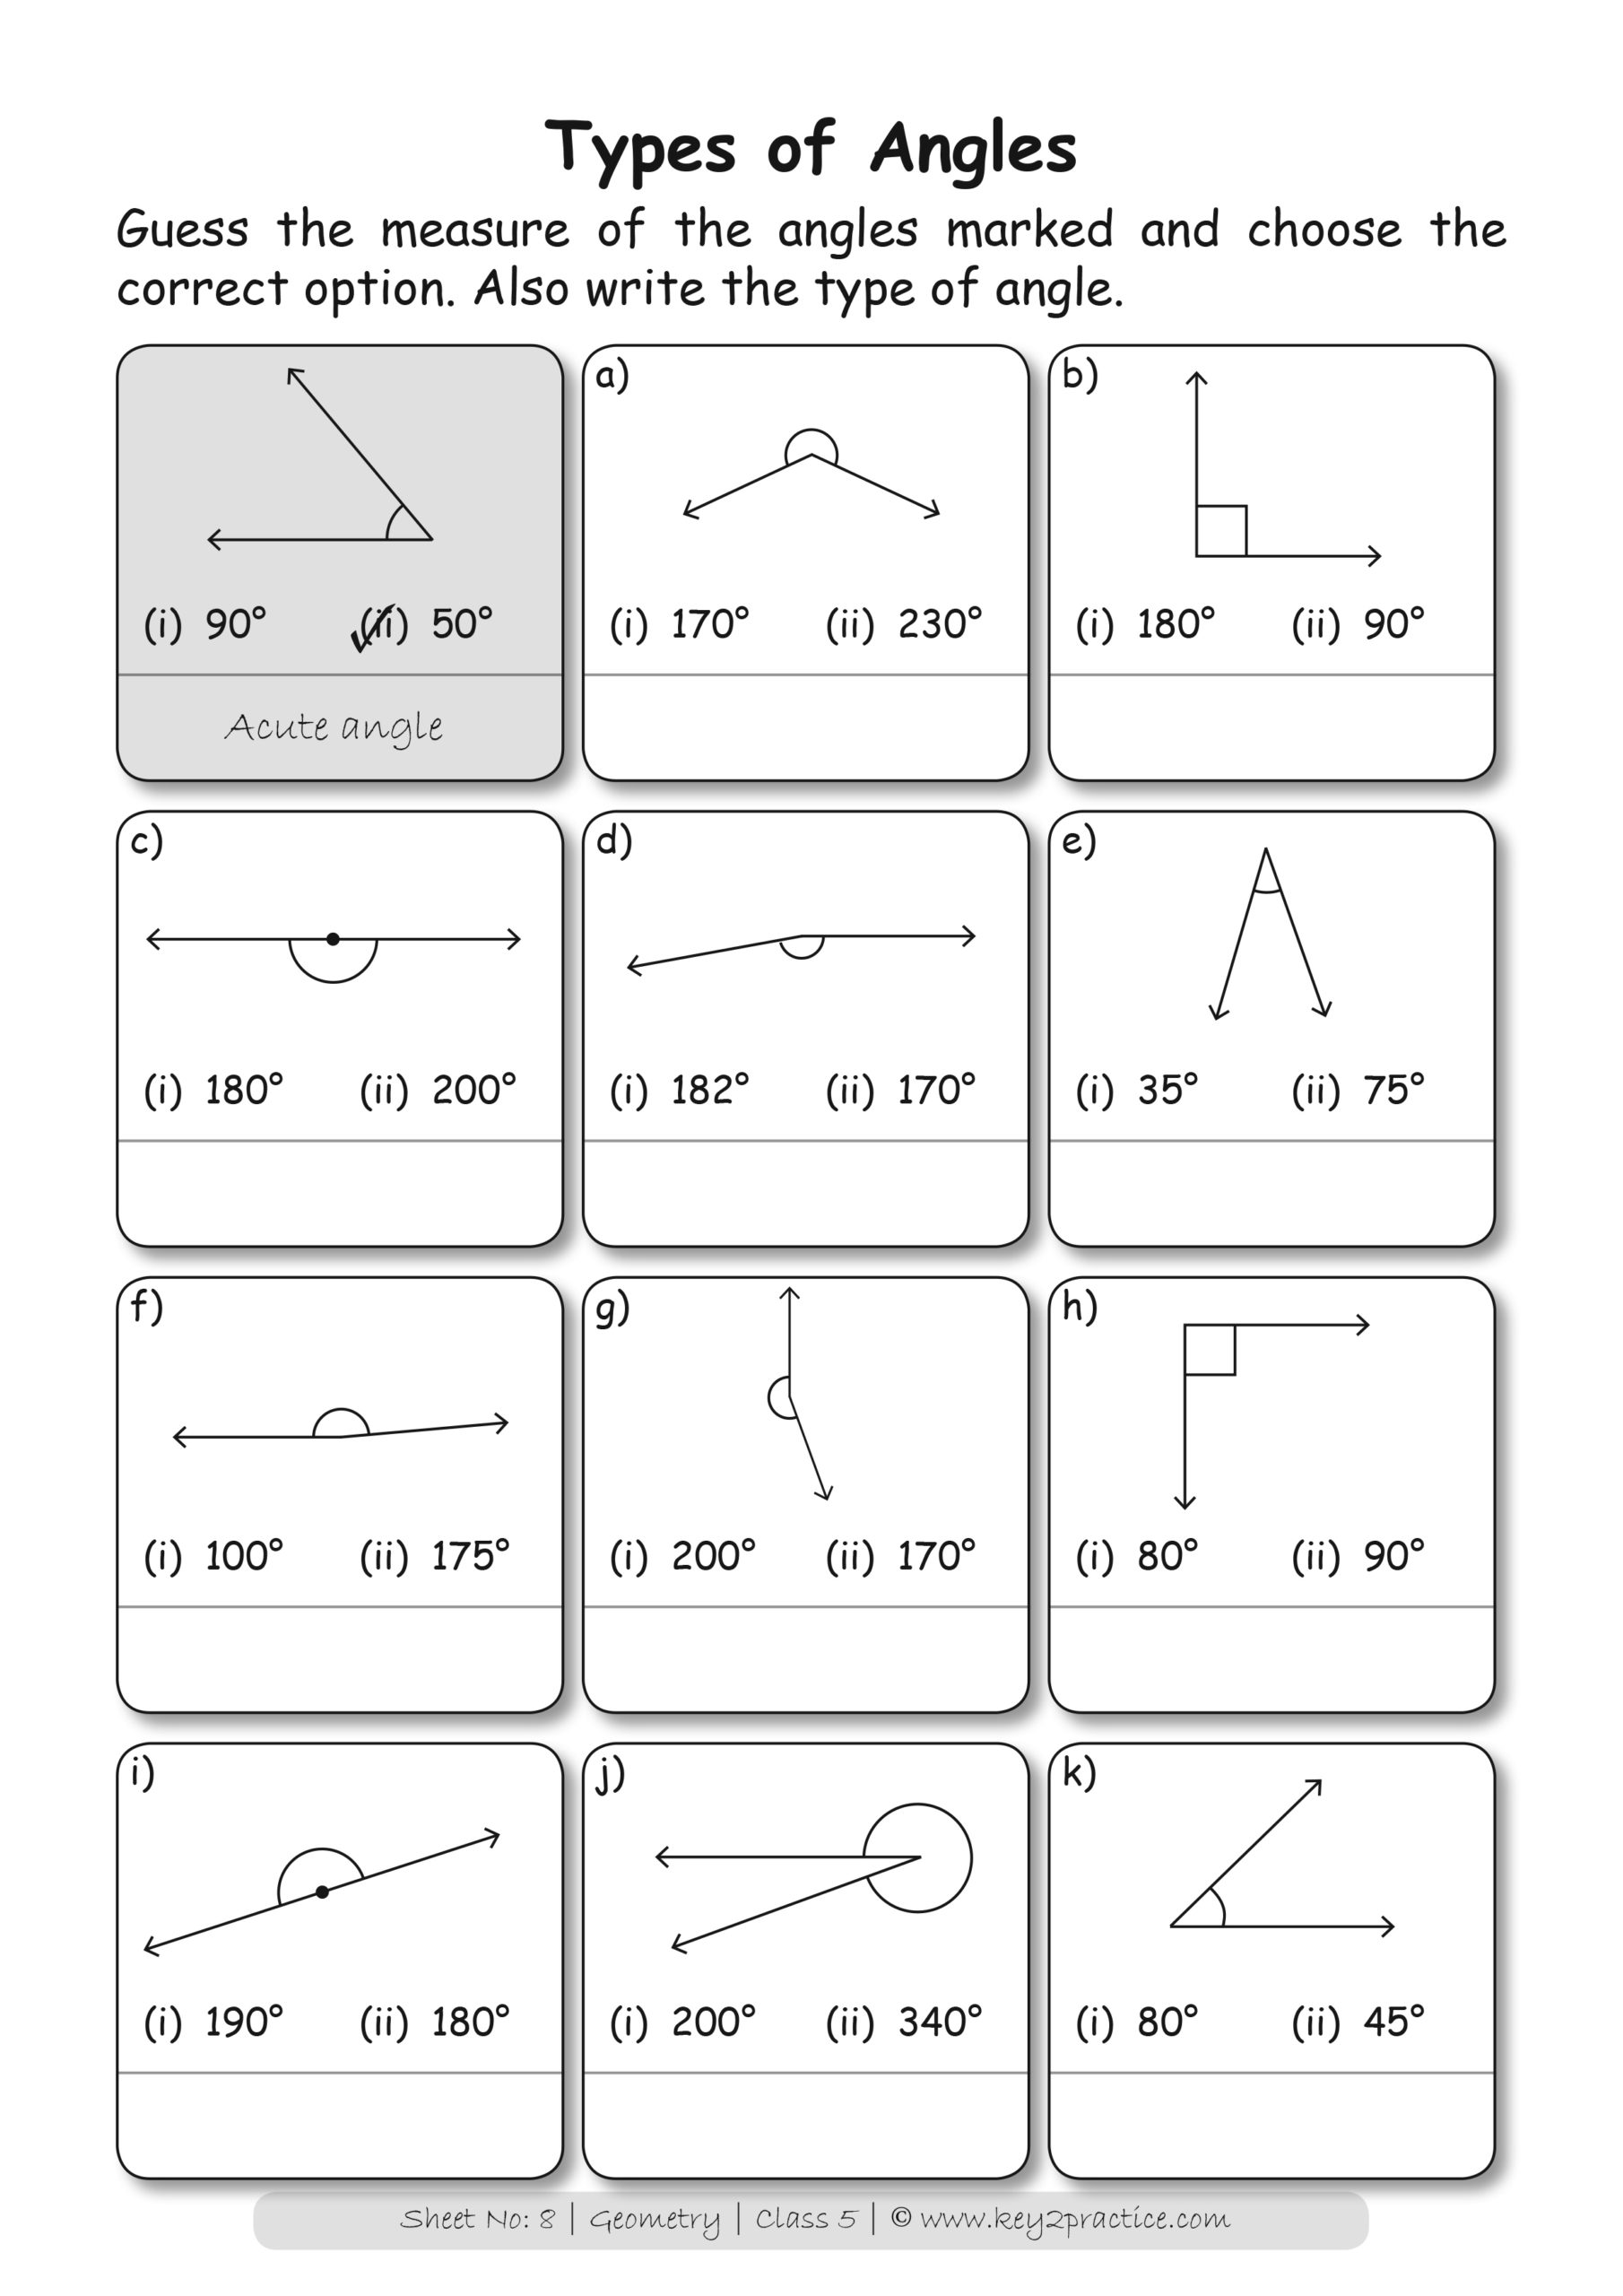 types-of-angles-worksheets-grade-5-maths-key2practice-workbooks